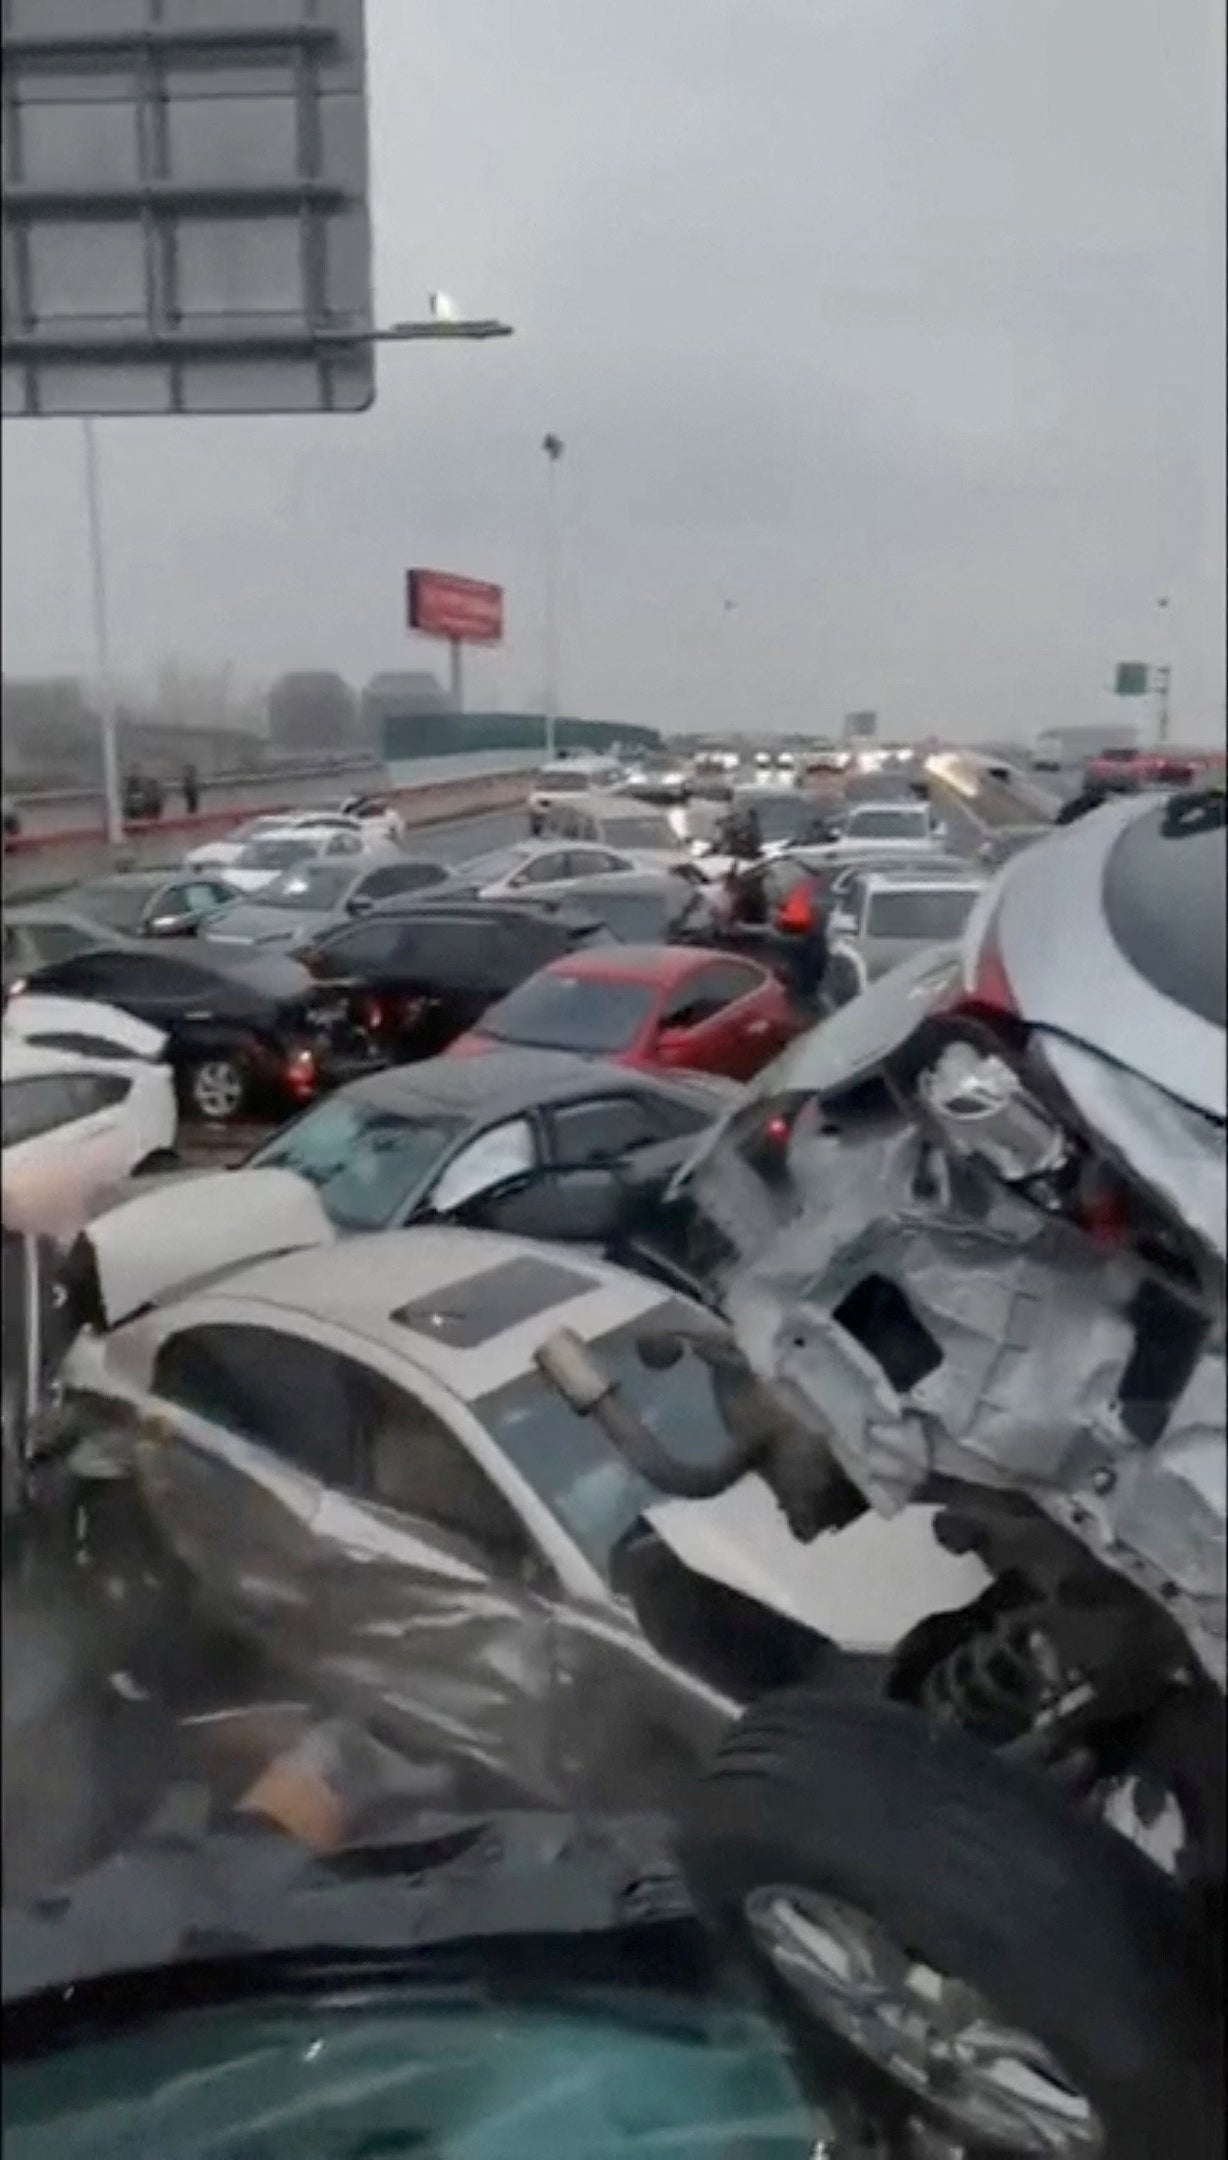 Cars pile up on an overpass during rainy and snowy weather in Suzhou